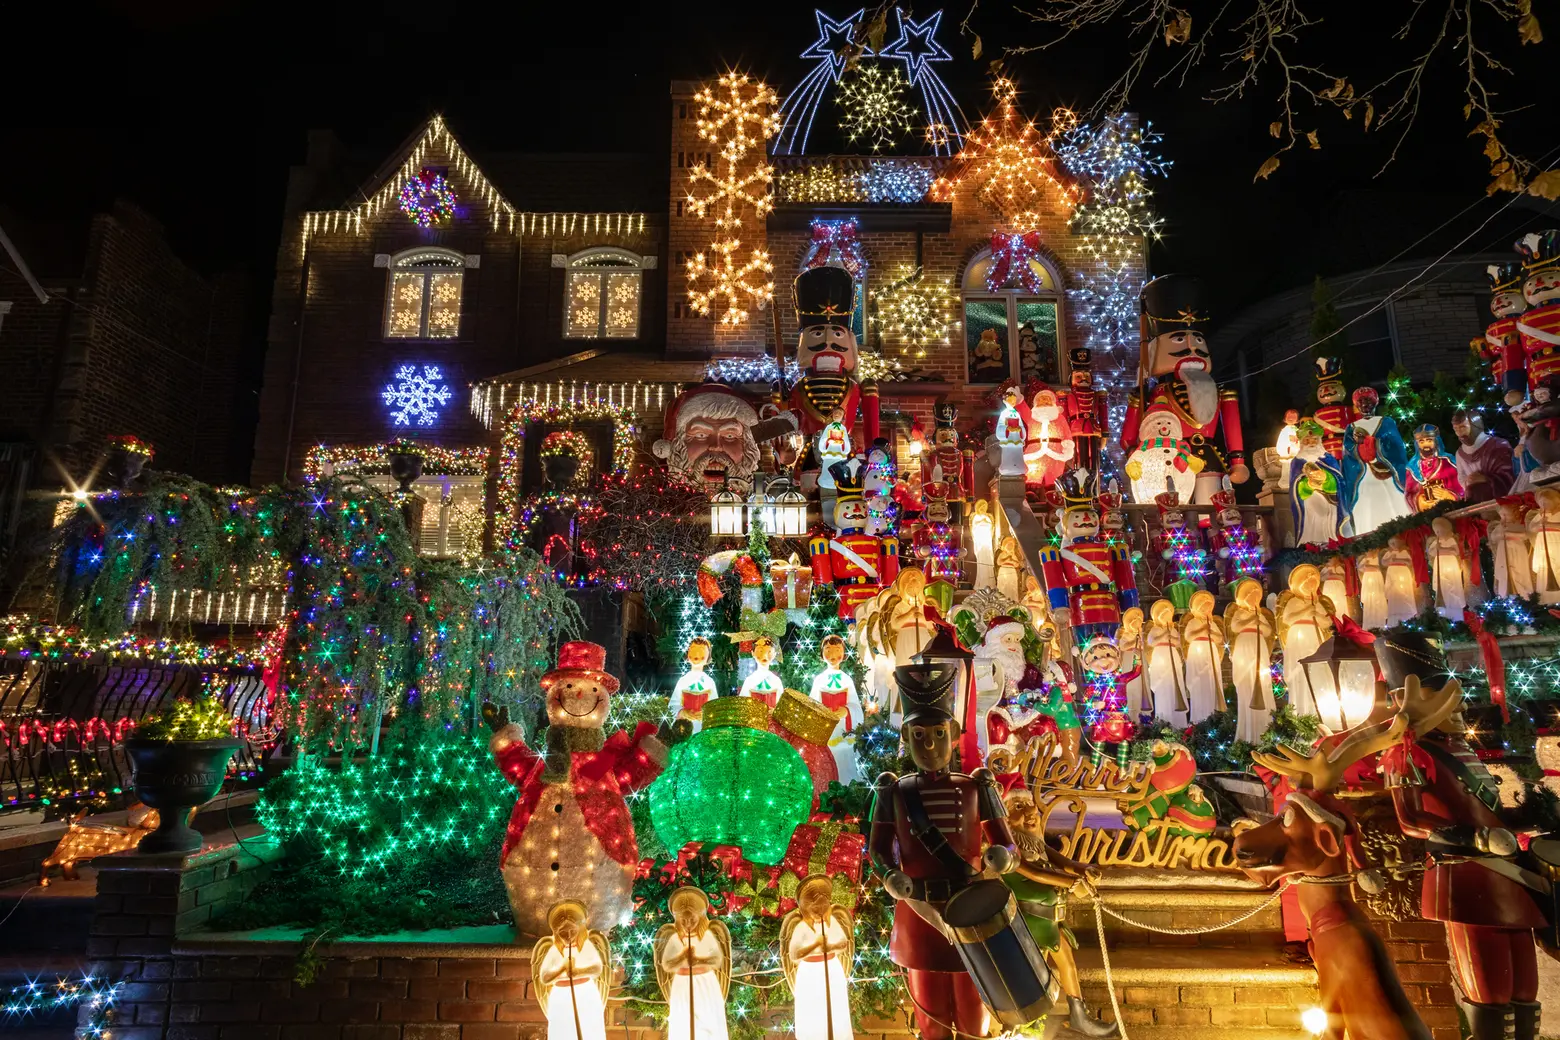 See this year’s completely outrageous Dyker Heights Christmas lights